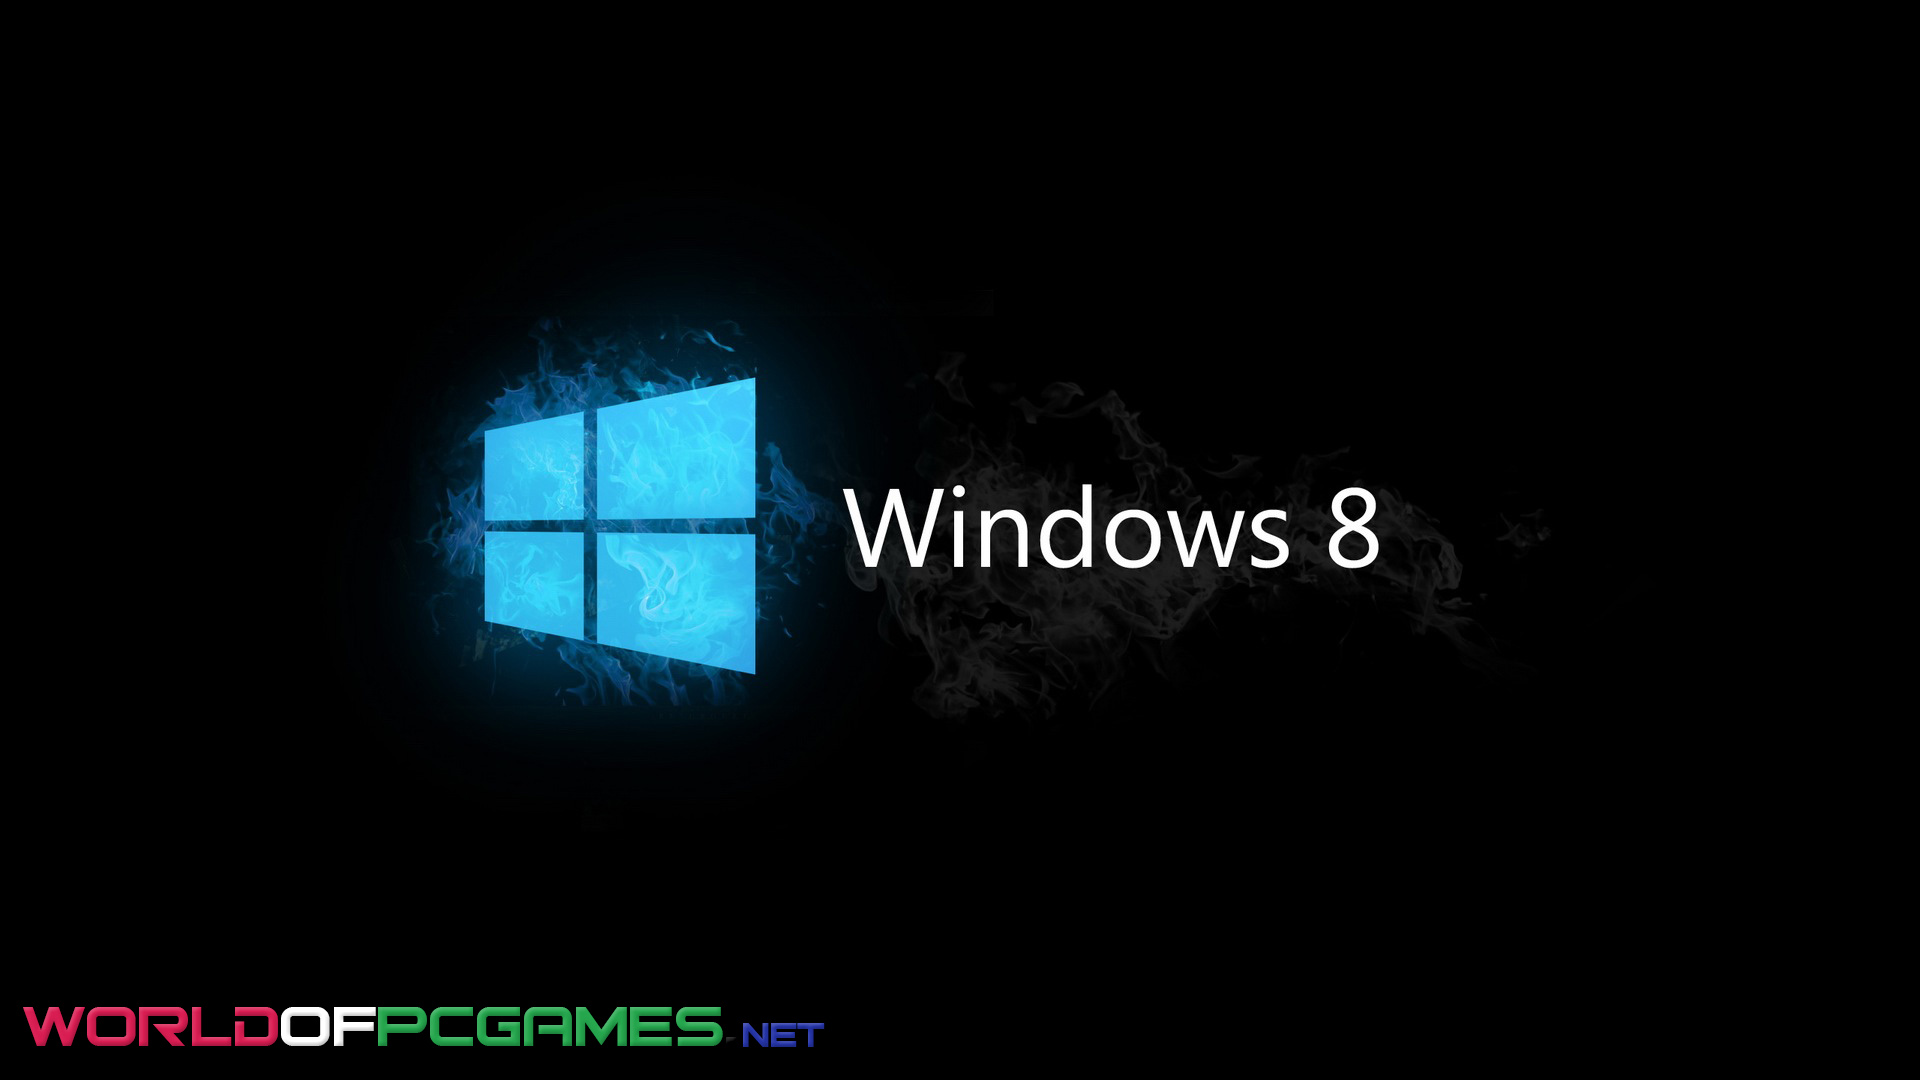 Windows 8 Activator Free Download By worldof-pcgames.net